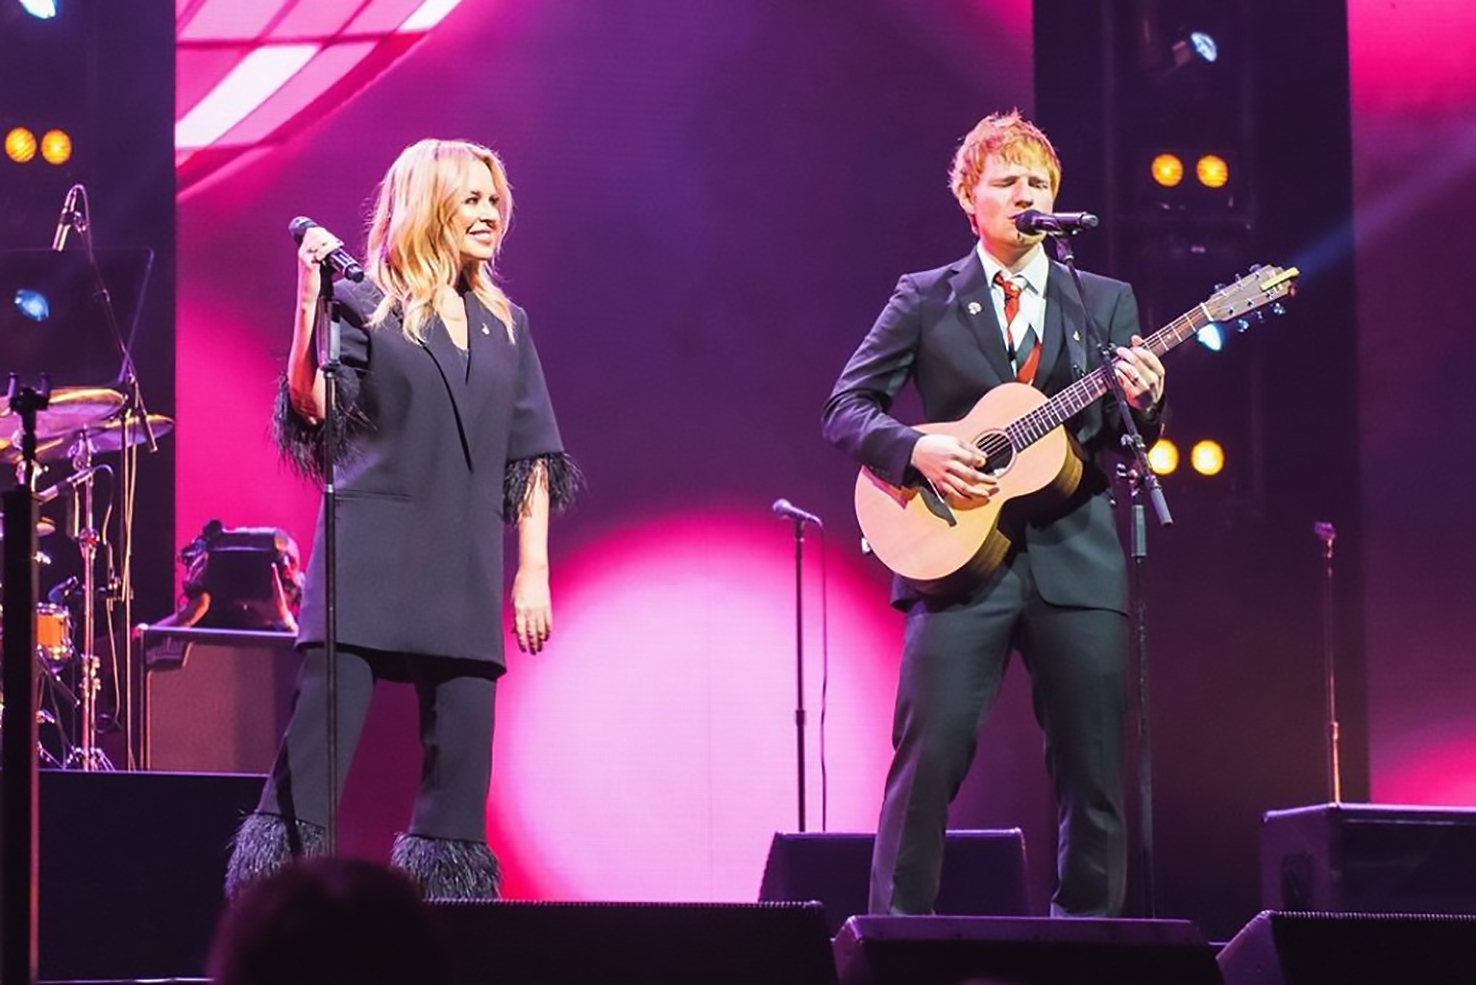 Jimmy teamed up Kylie and Ed in 2021 when Ed made a tearful appearance in Australia at the memorial for his late music-mogul pal Michael Gudinski